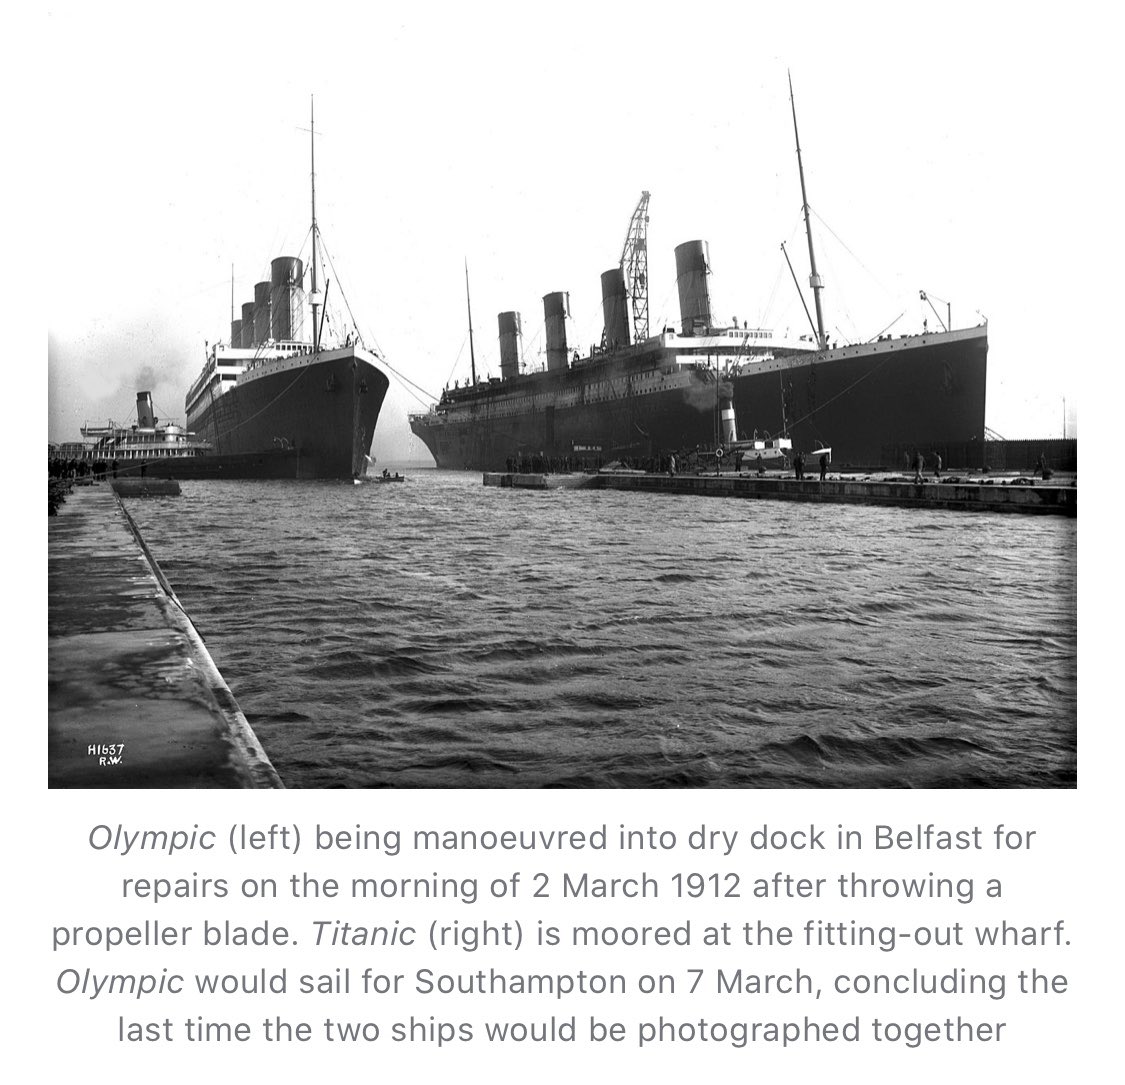 Bobbie The Titanic Had A Sister Ship Rms Olympic Which Served In Wwi Some Of Her Accomplishments Included Rescuing British Soldiers From Drowning After Their Ship Was Sunk Carrying Canadian